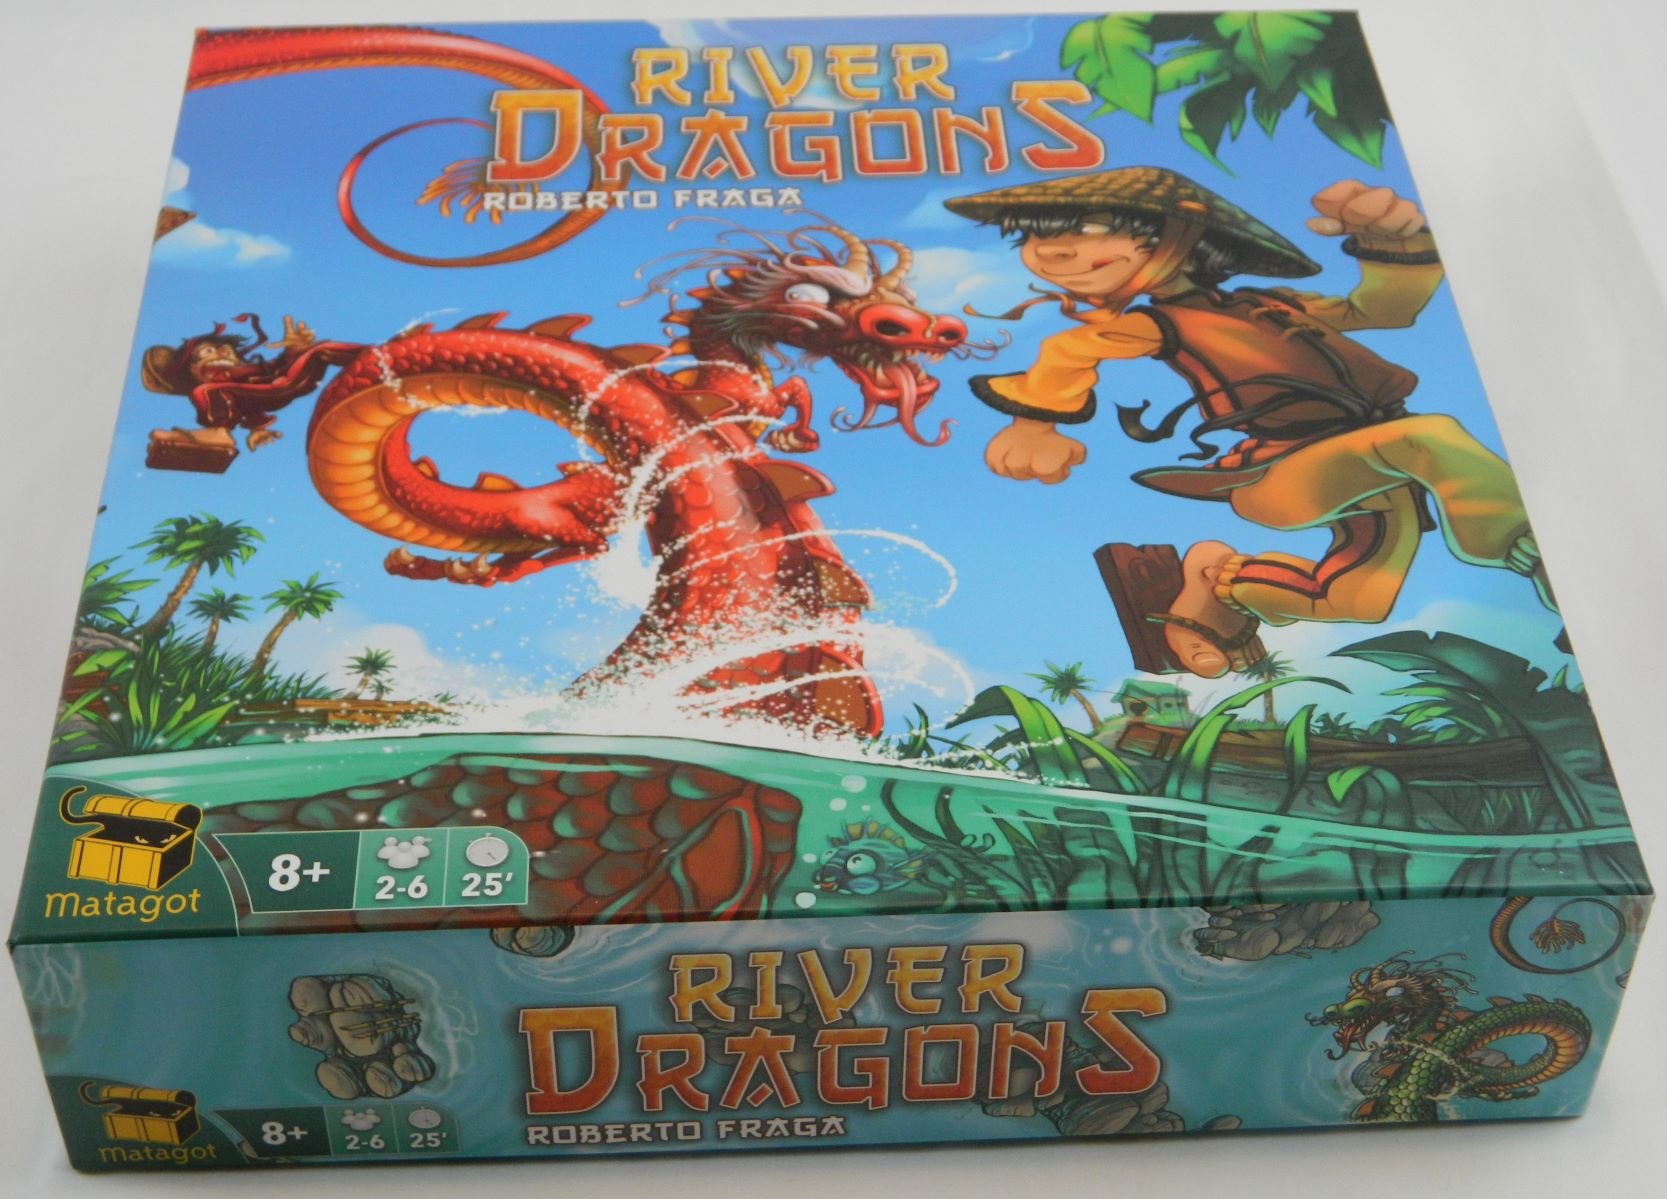 Box for River Dragons